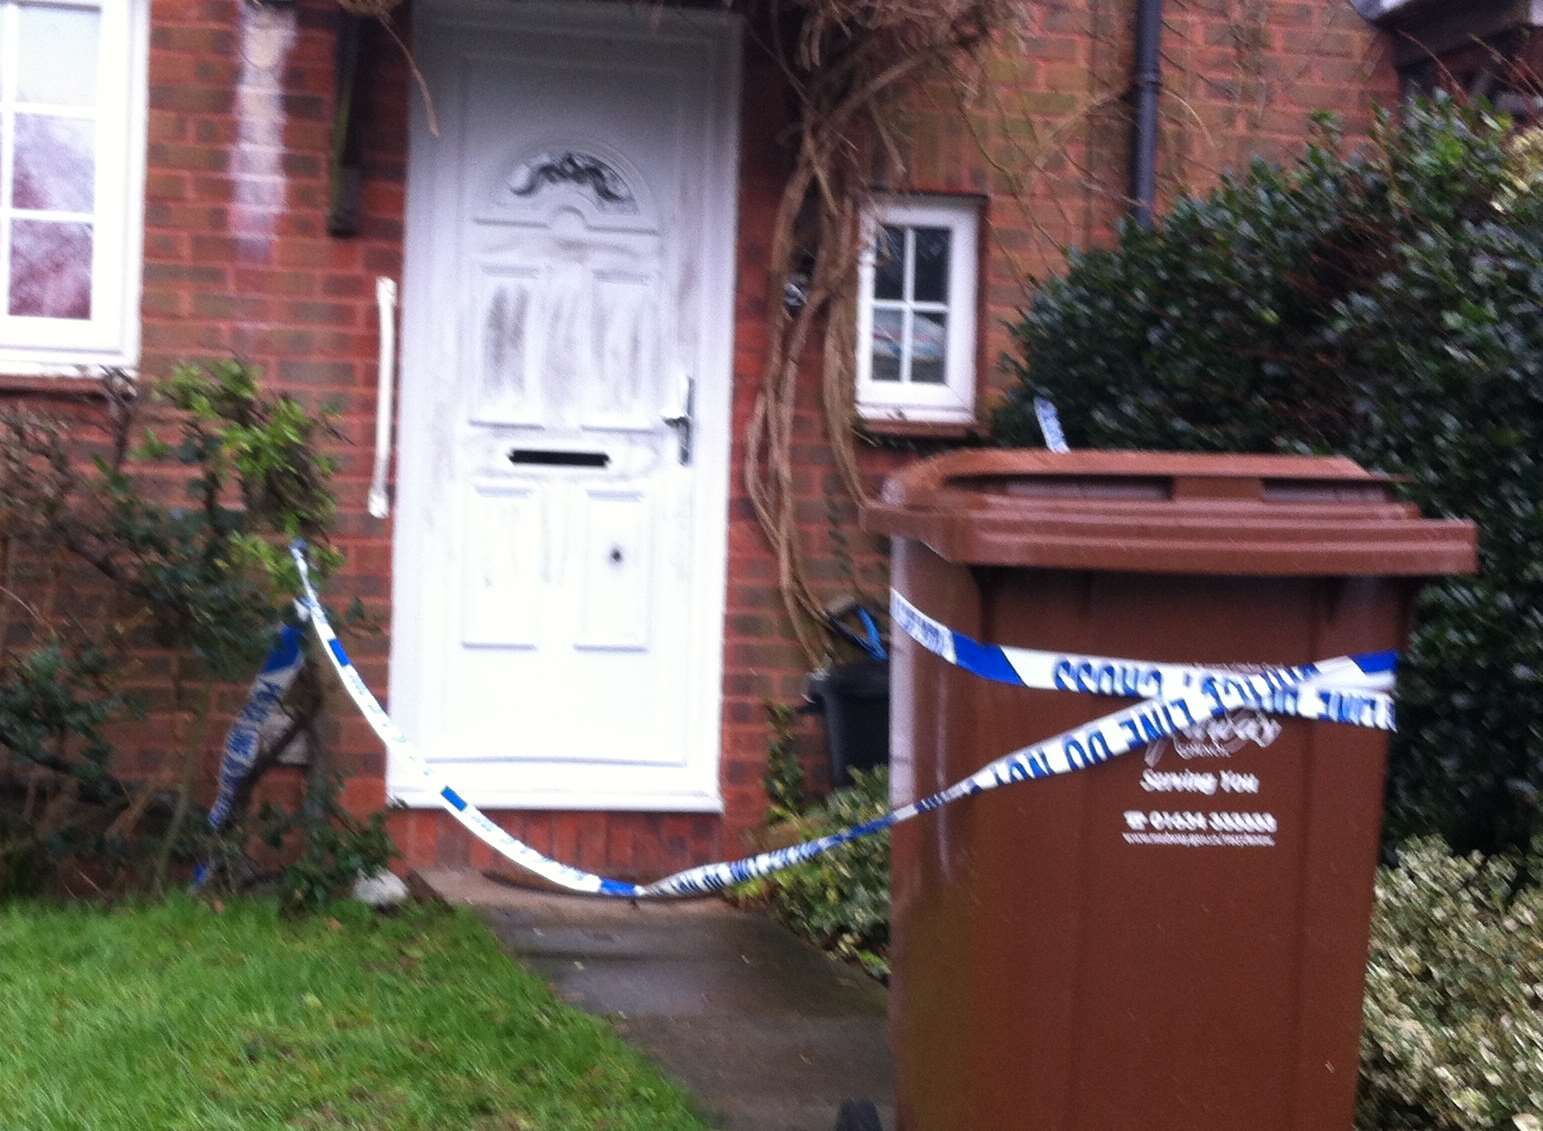 A man was shot at a house in Lordswood